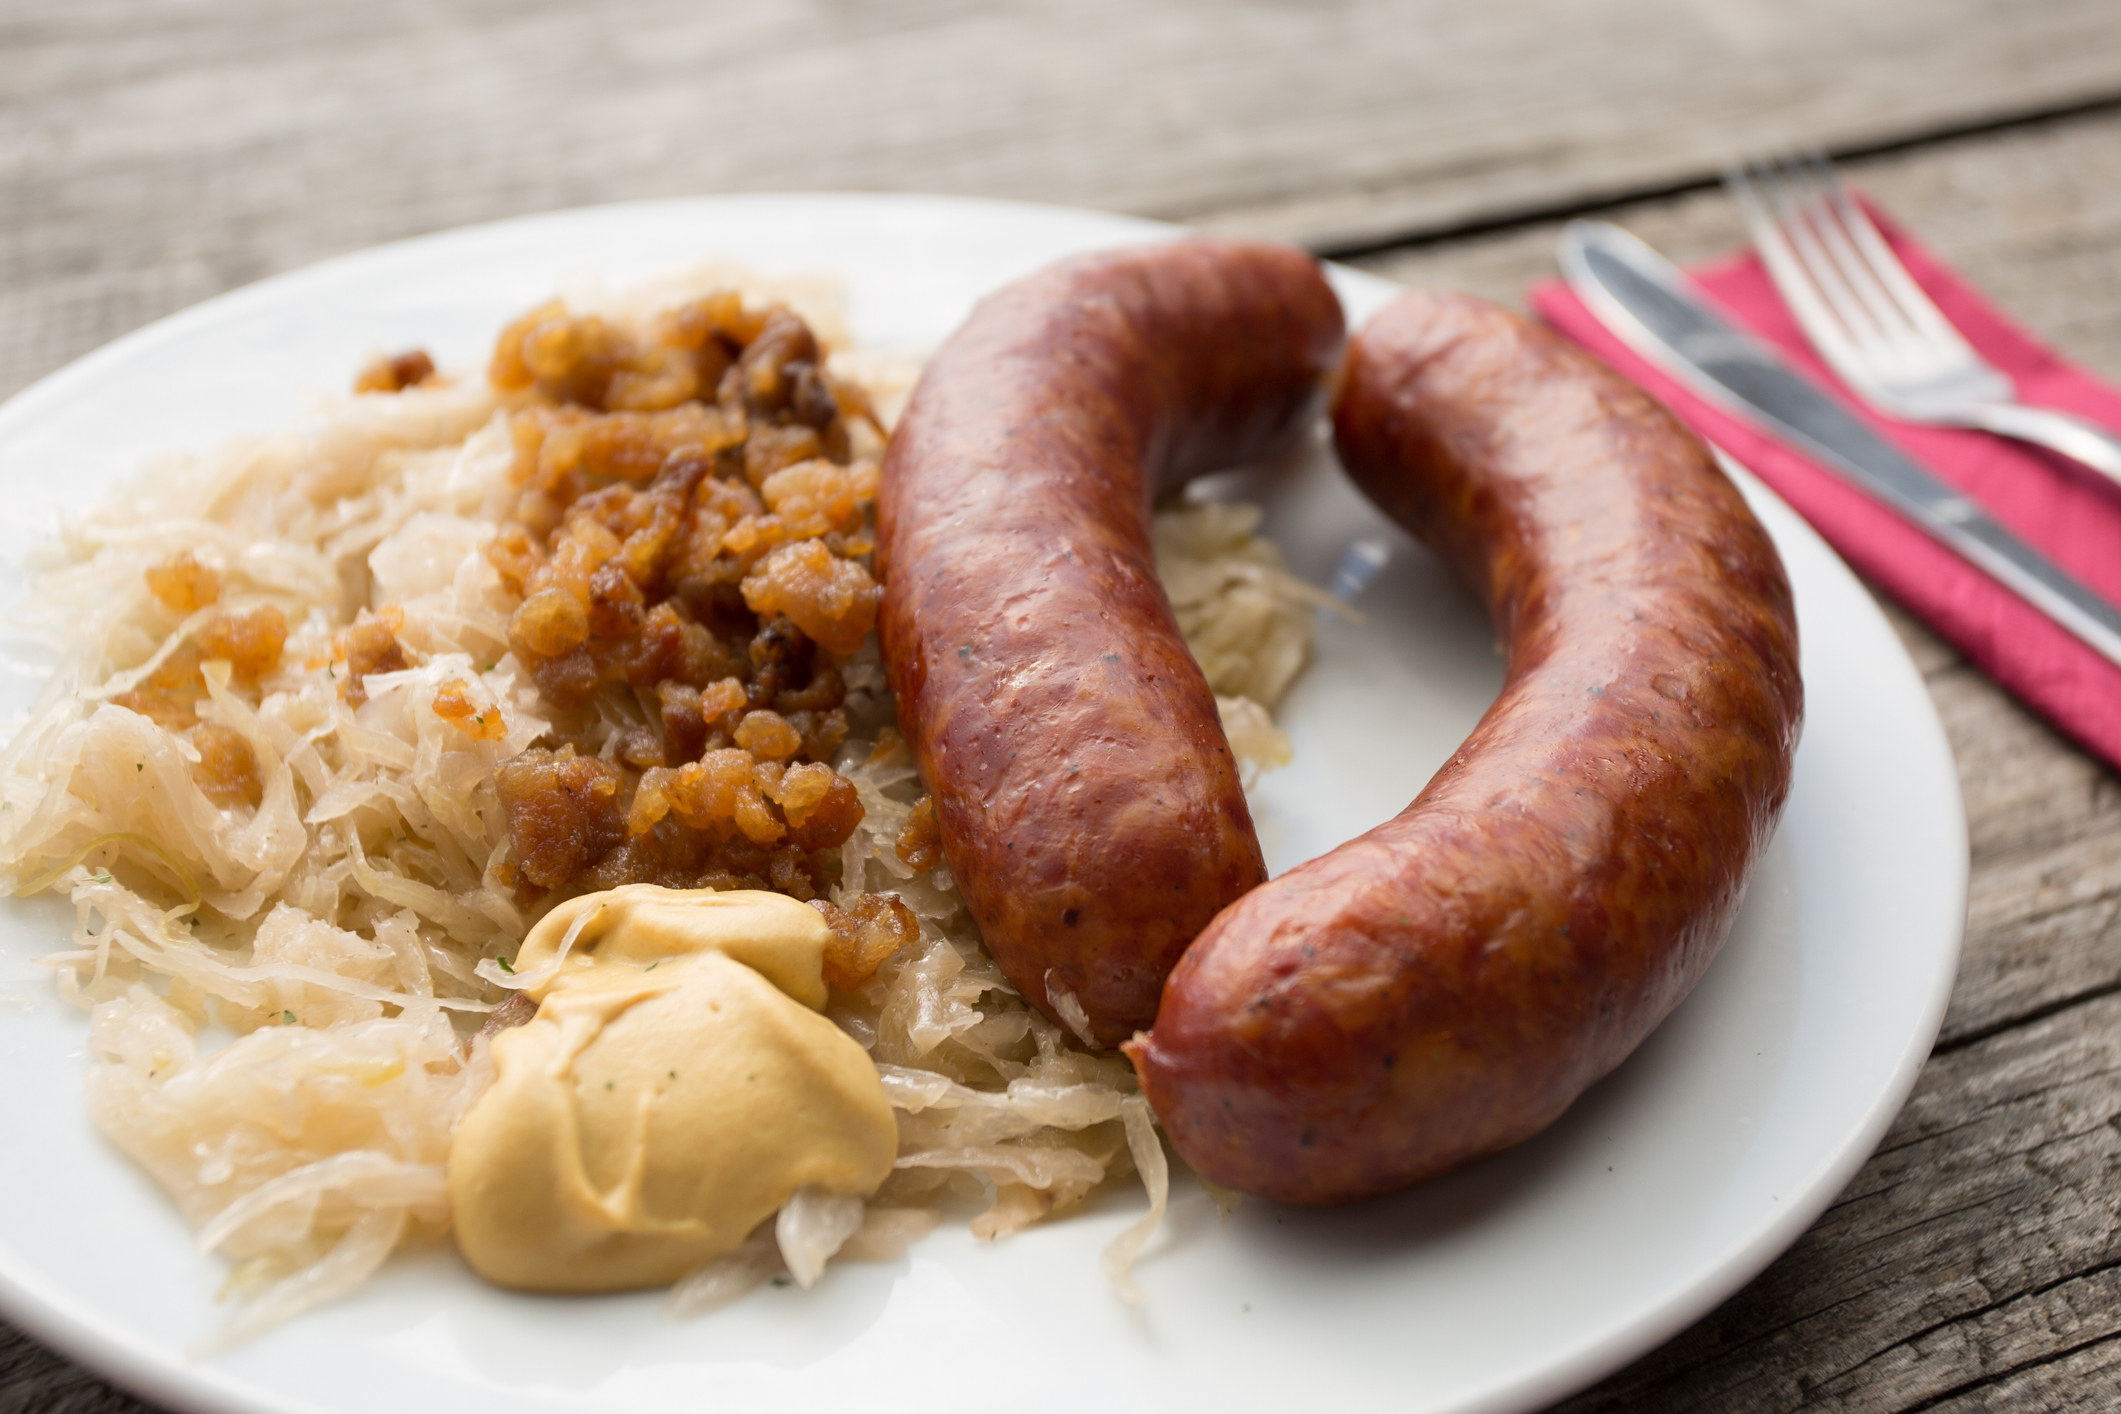 Sausage and cabbage with pork graves.